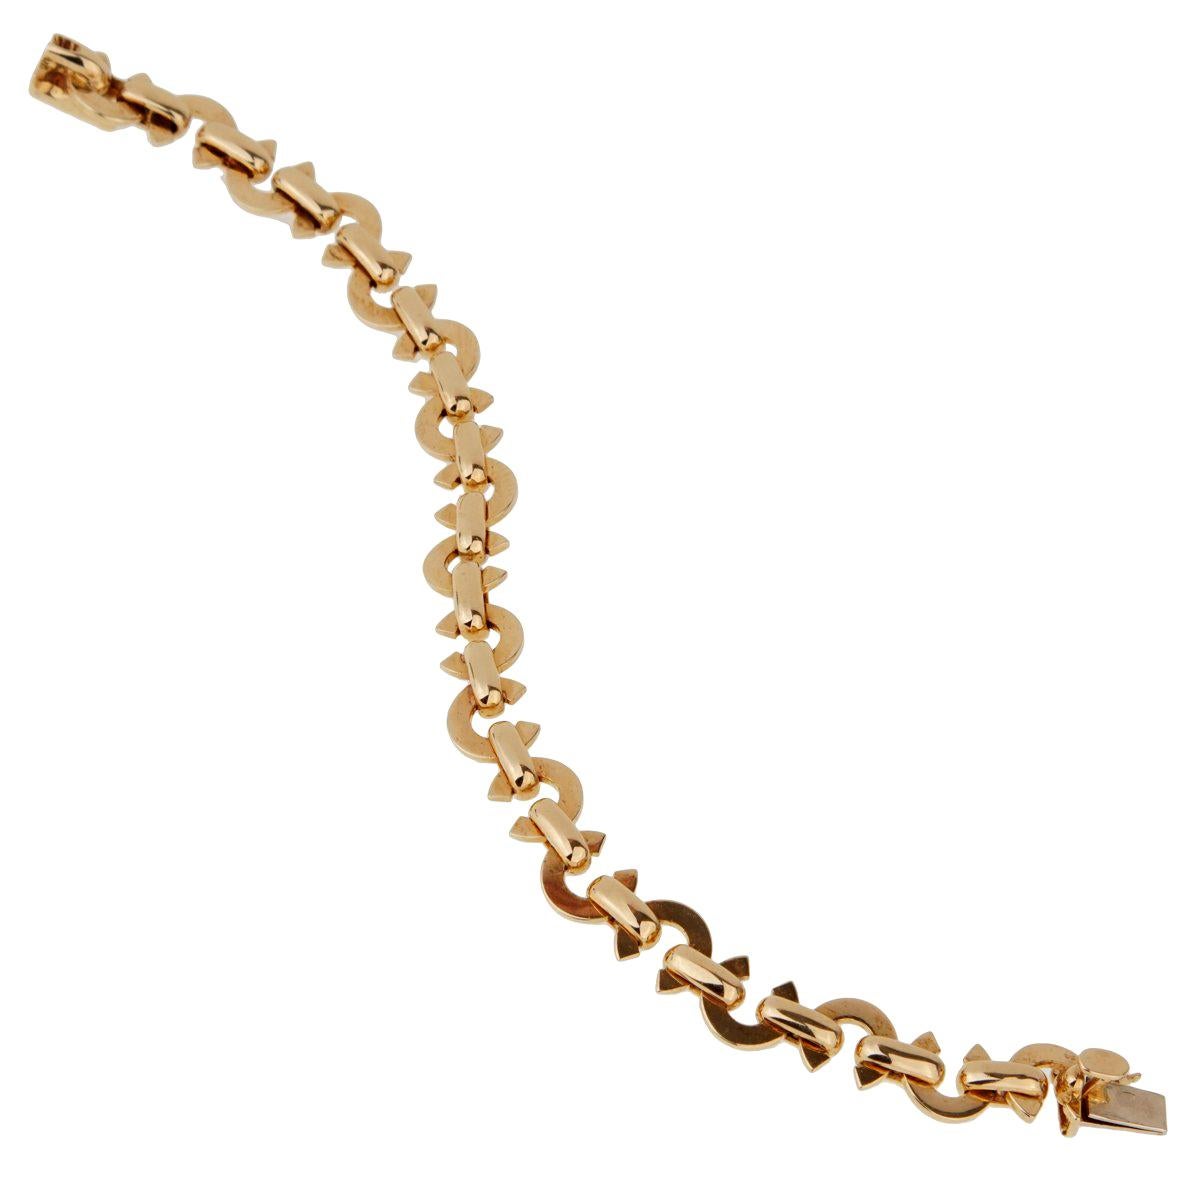 An iconic Chanel charm bracelet featuring alternating Chanel C motifs in 18k yellow gold. The bracelet measures 6 1/4